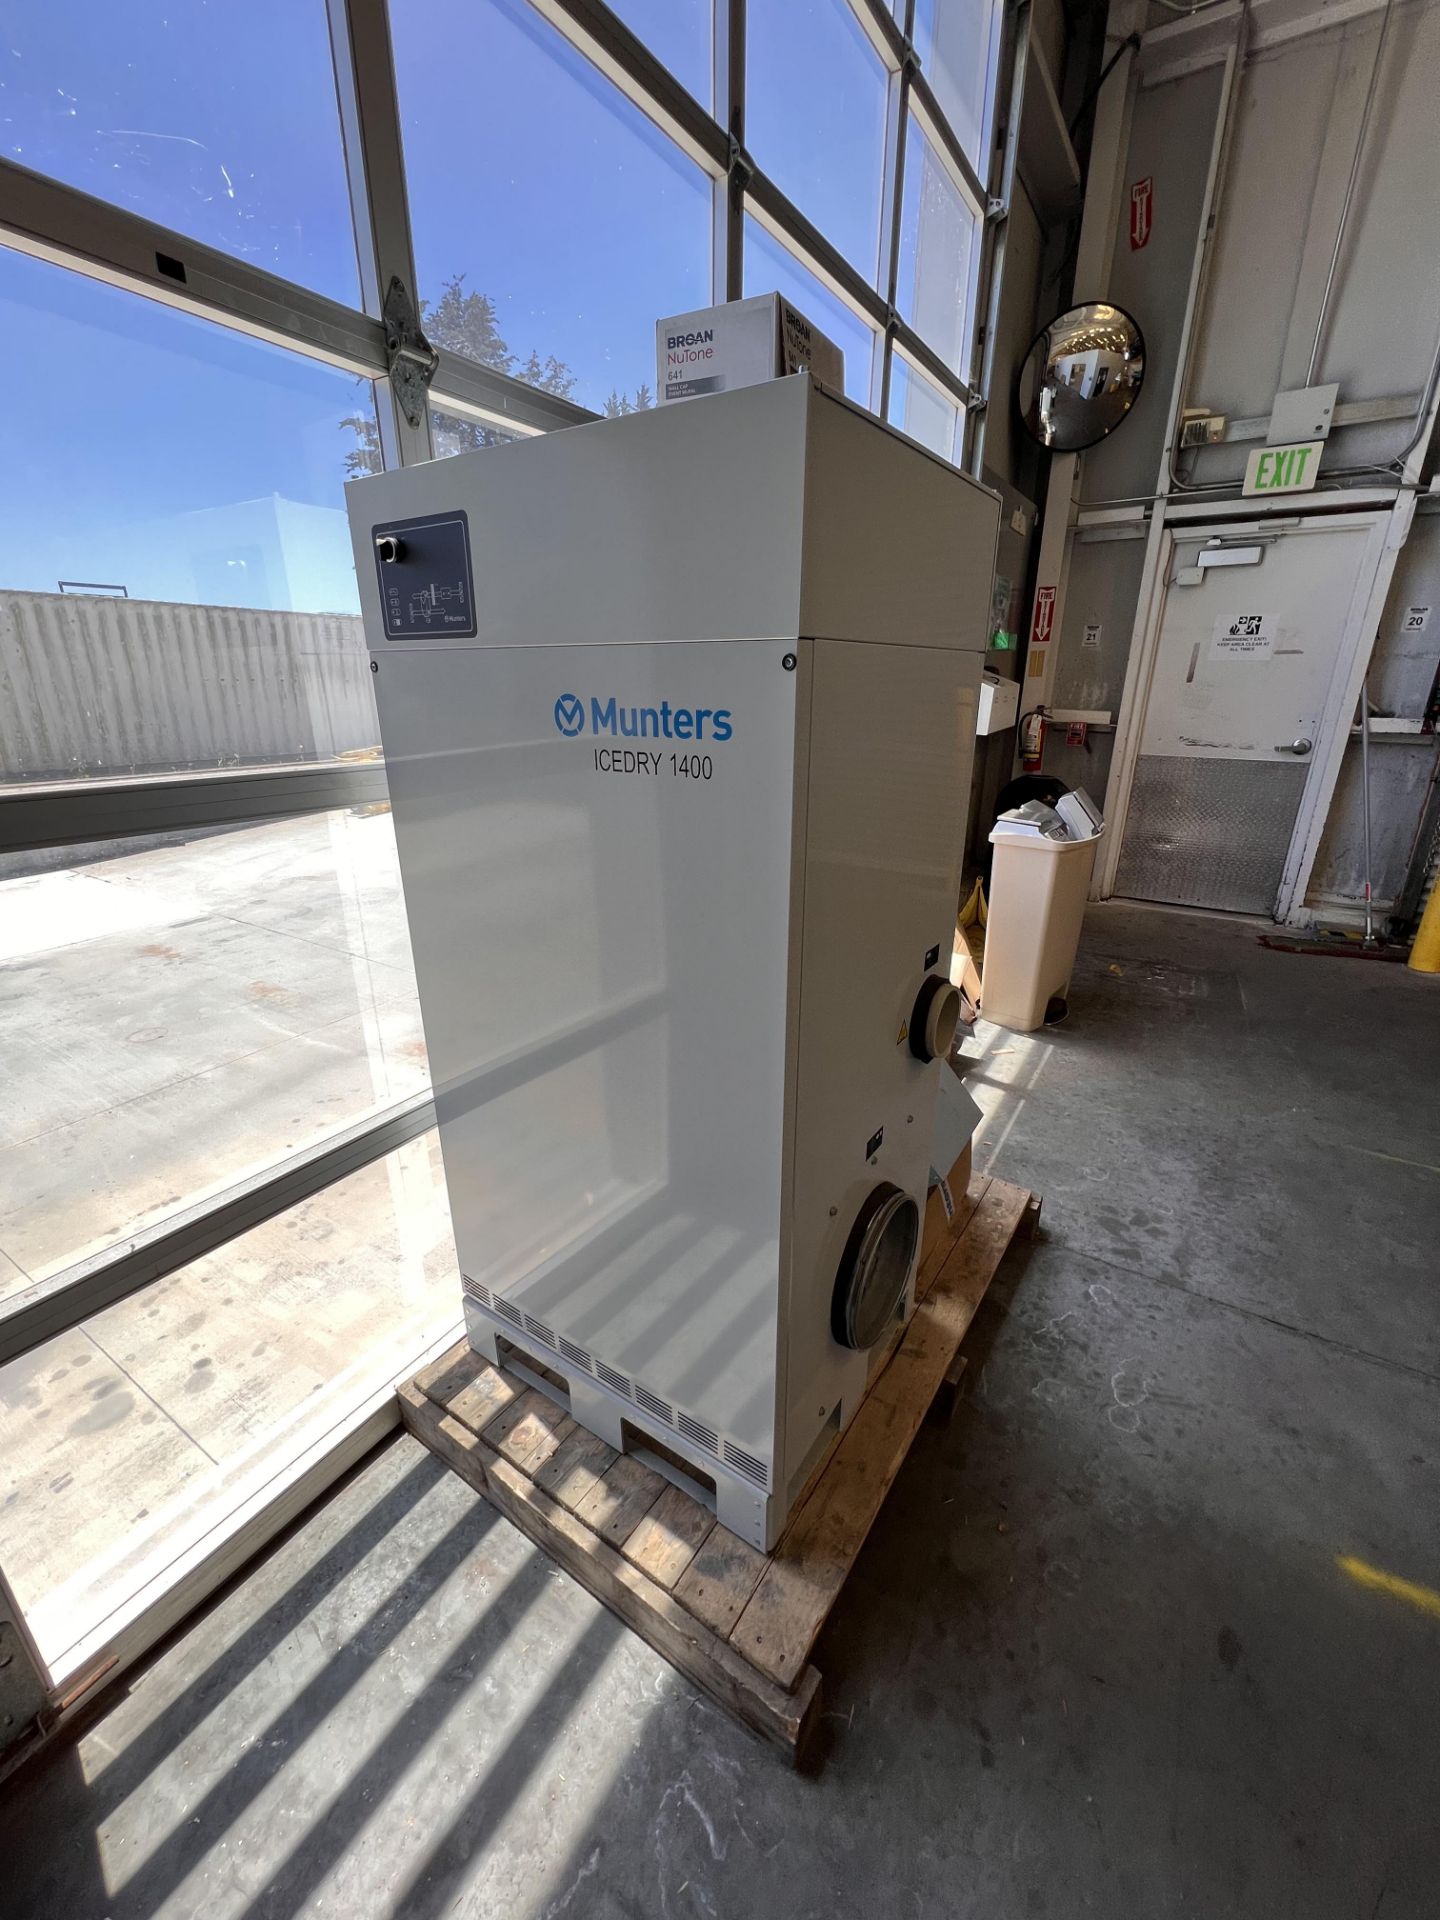 MUNTERS ICEDRY1400 STAND ALONE DEHUMIDIFIER, DESIGNED FOR INSTALLATION INSIDE COLD STORE WITH